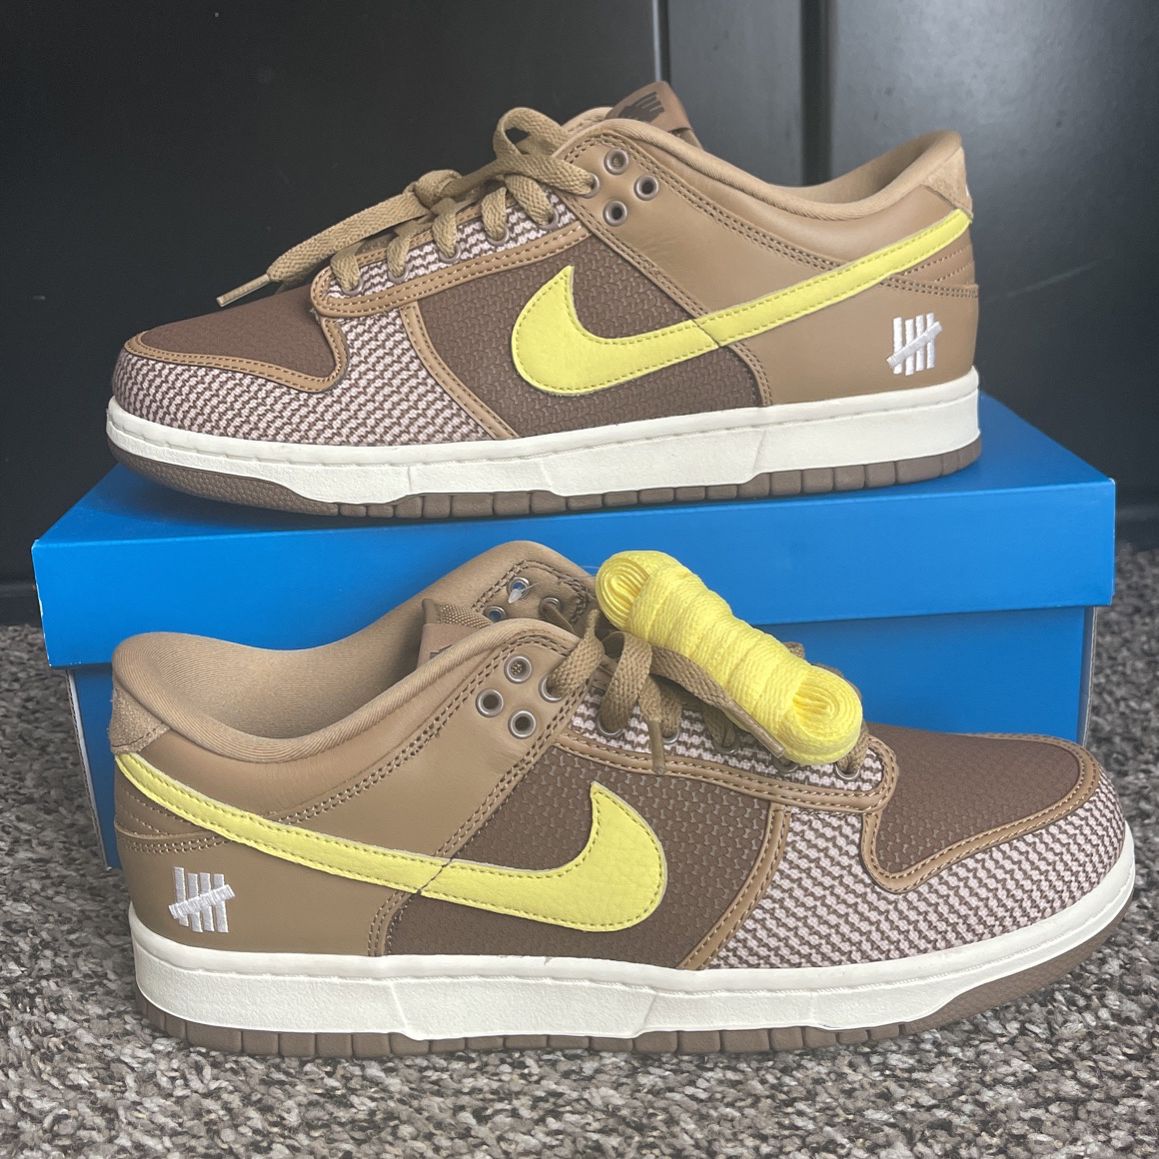 Nike Off White Dunks Lot 16 for Sale in Tempe, AZ - OfferUp